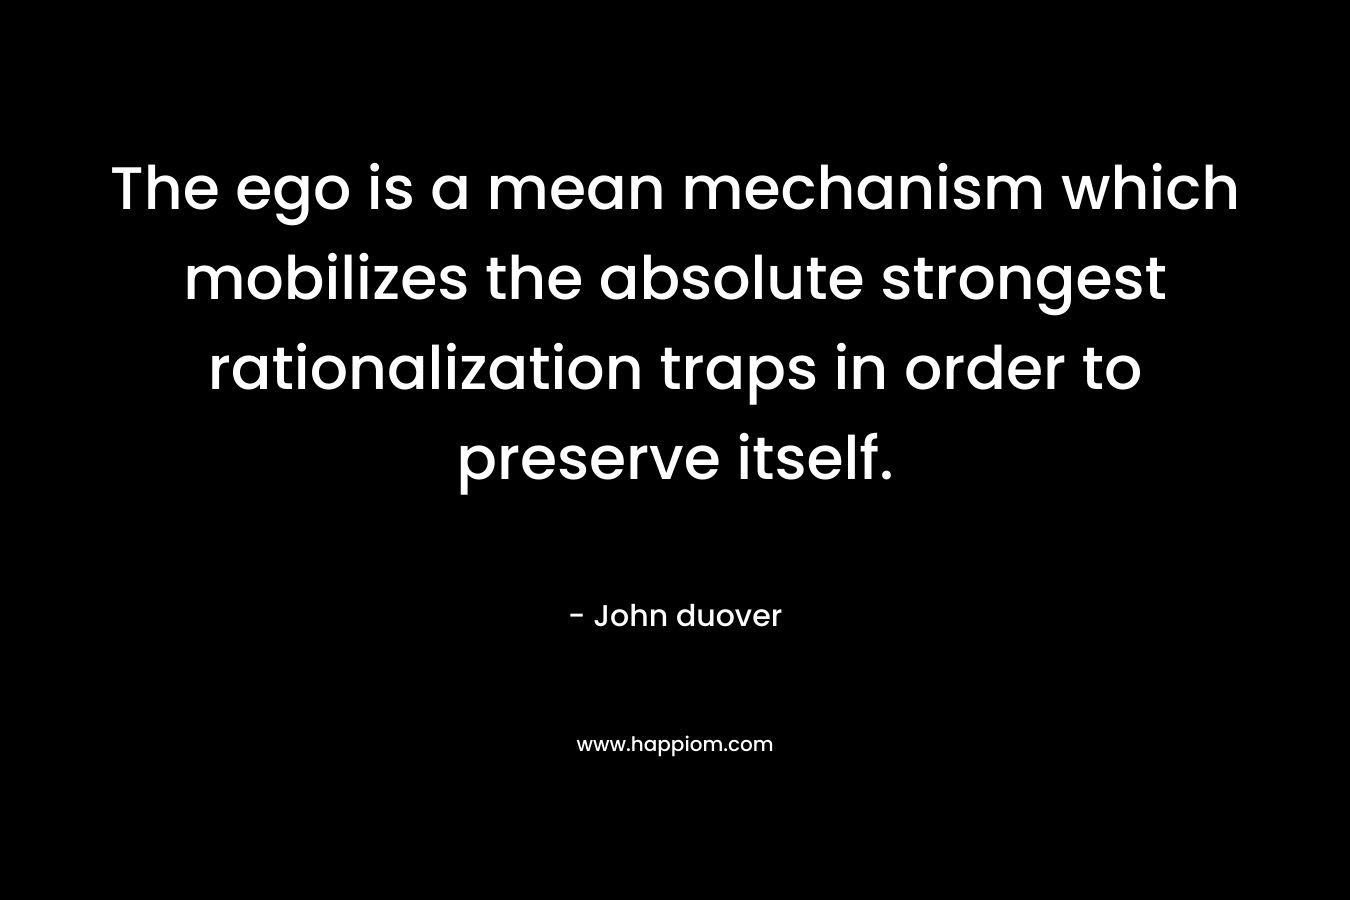 The ego is a mean mechanism which mobilizes the absolute strongest rationalization traps in order to preserve itself. – John duover